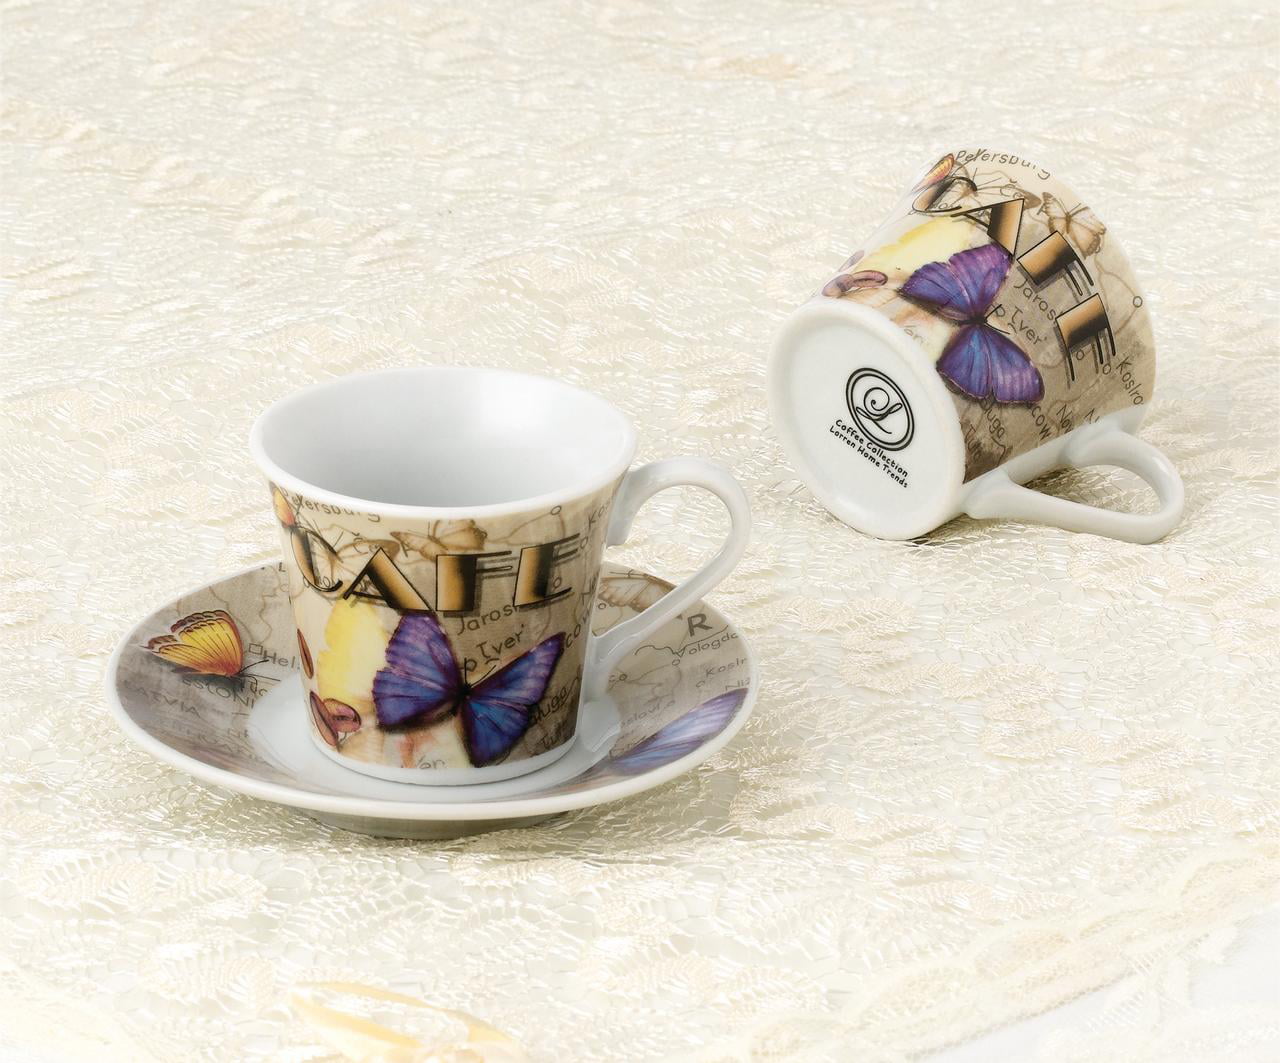 Lareina Espresso Cups with Saucers, Spoons and Metal Stand, Small 4 oz  Ceramic Cappuccino Coffee Cup…See more Lareina Espresso Cups with Saucers